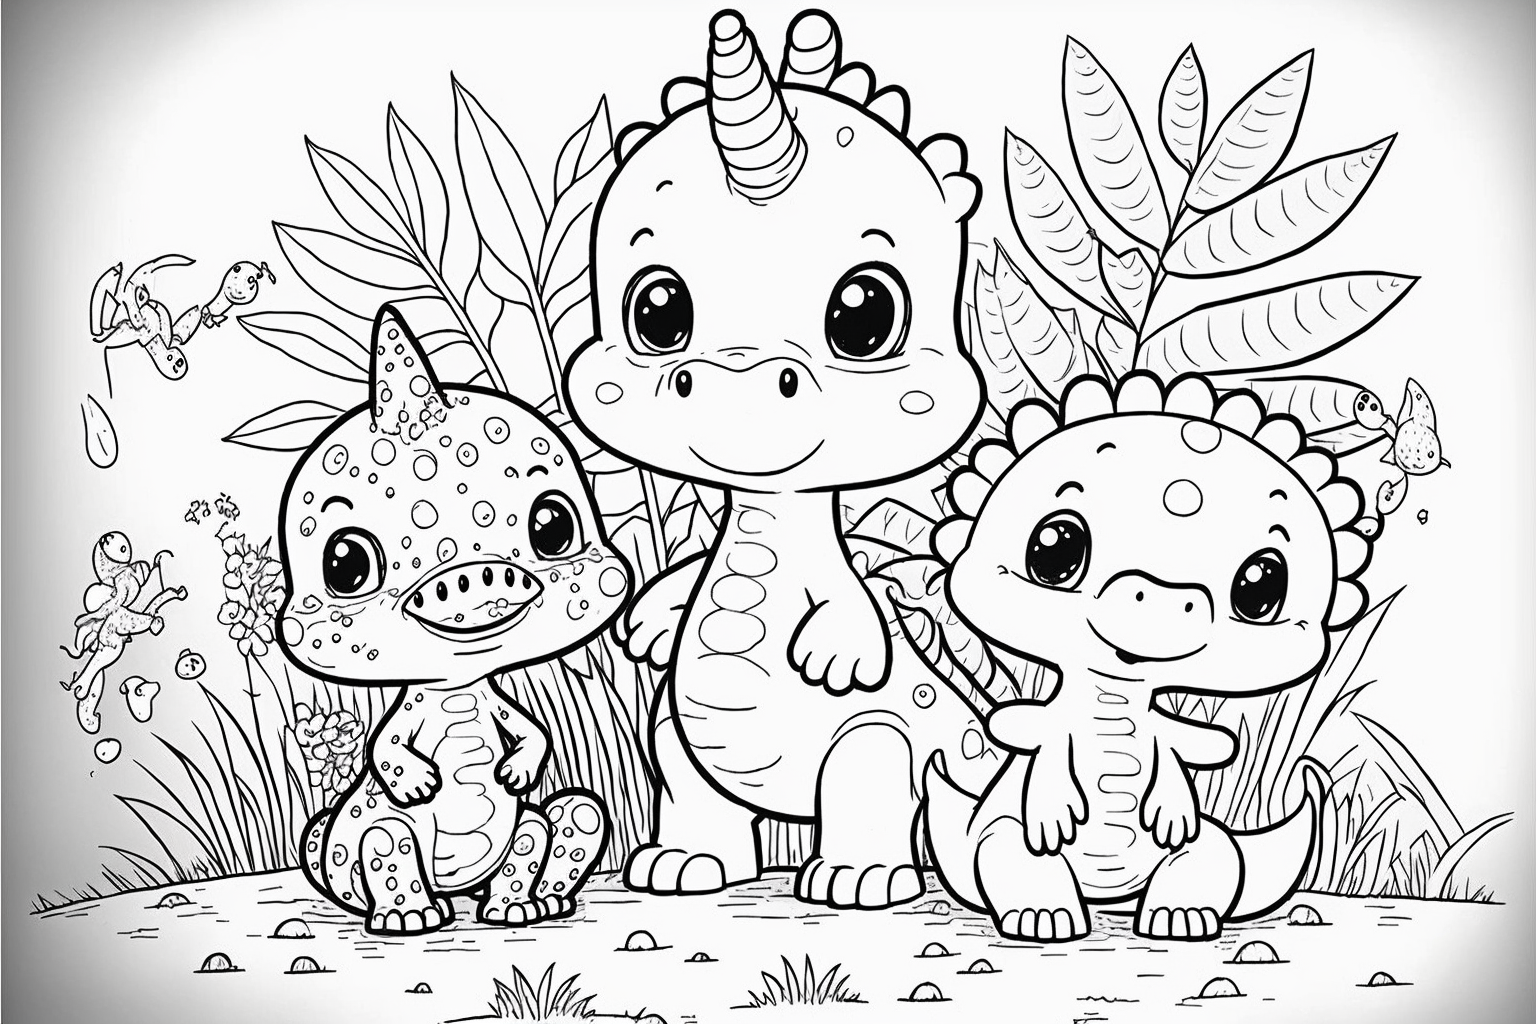 fun coloring pages for boys